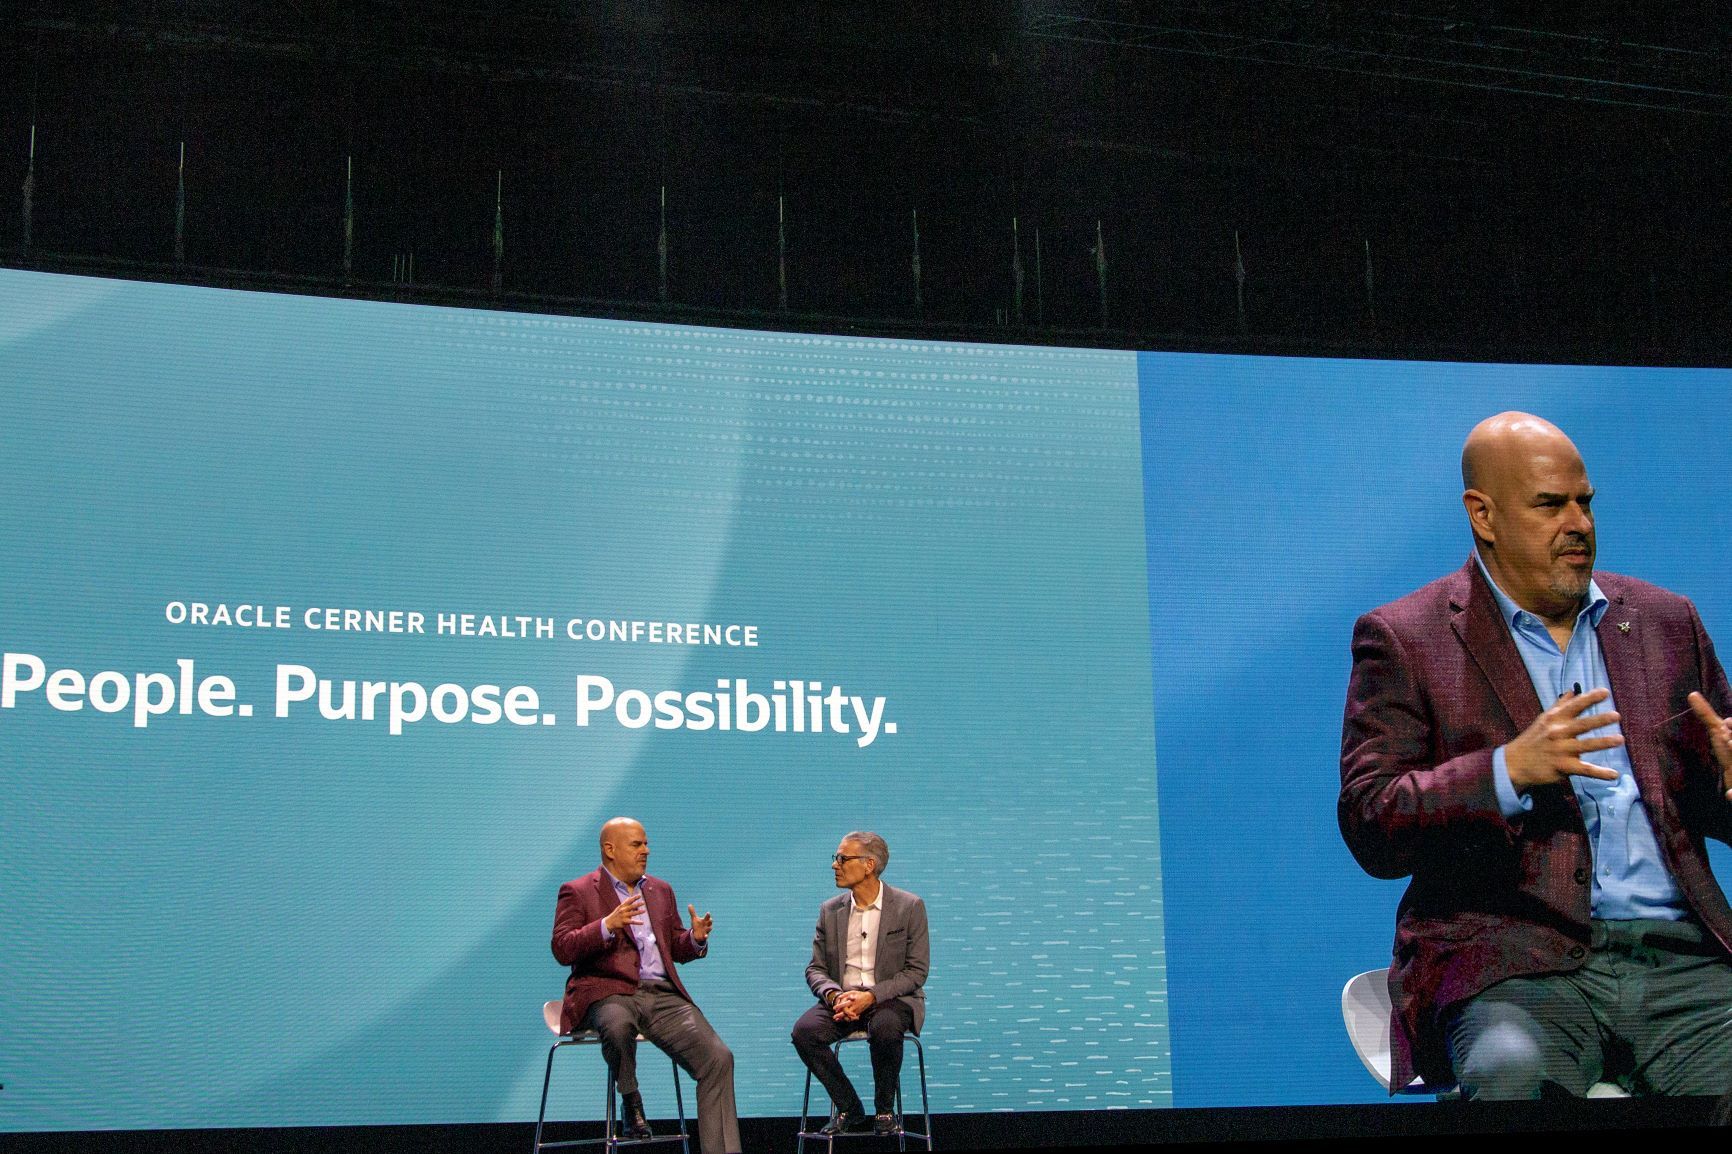 Mike Sicilia, left, and David Feinberg of Oracle Cerner talk about the company's focus on healthcare at the Oracle Cerner Health Conference in Kansas City, Mo. Monday. (Image by Oracle Cerner)